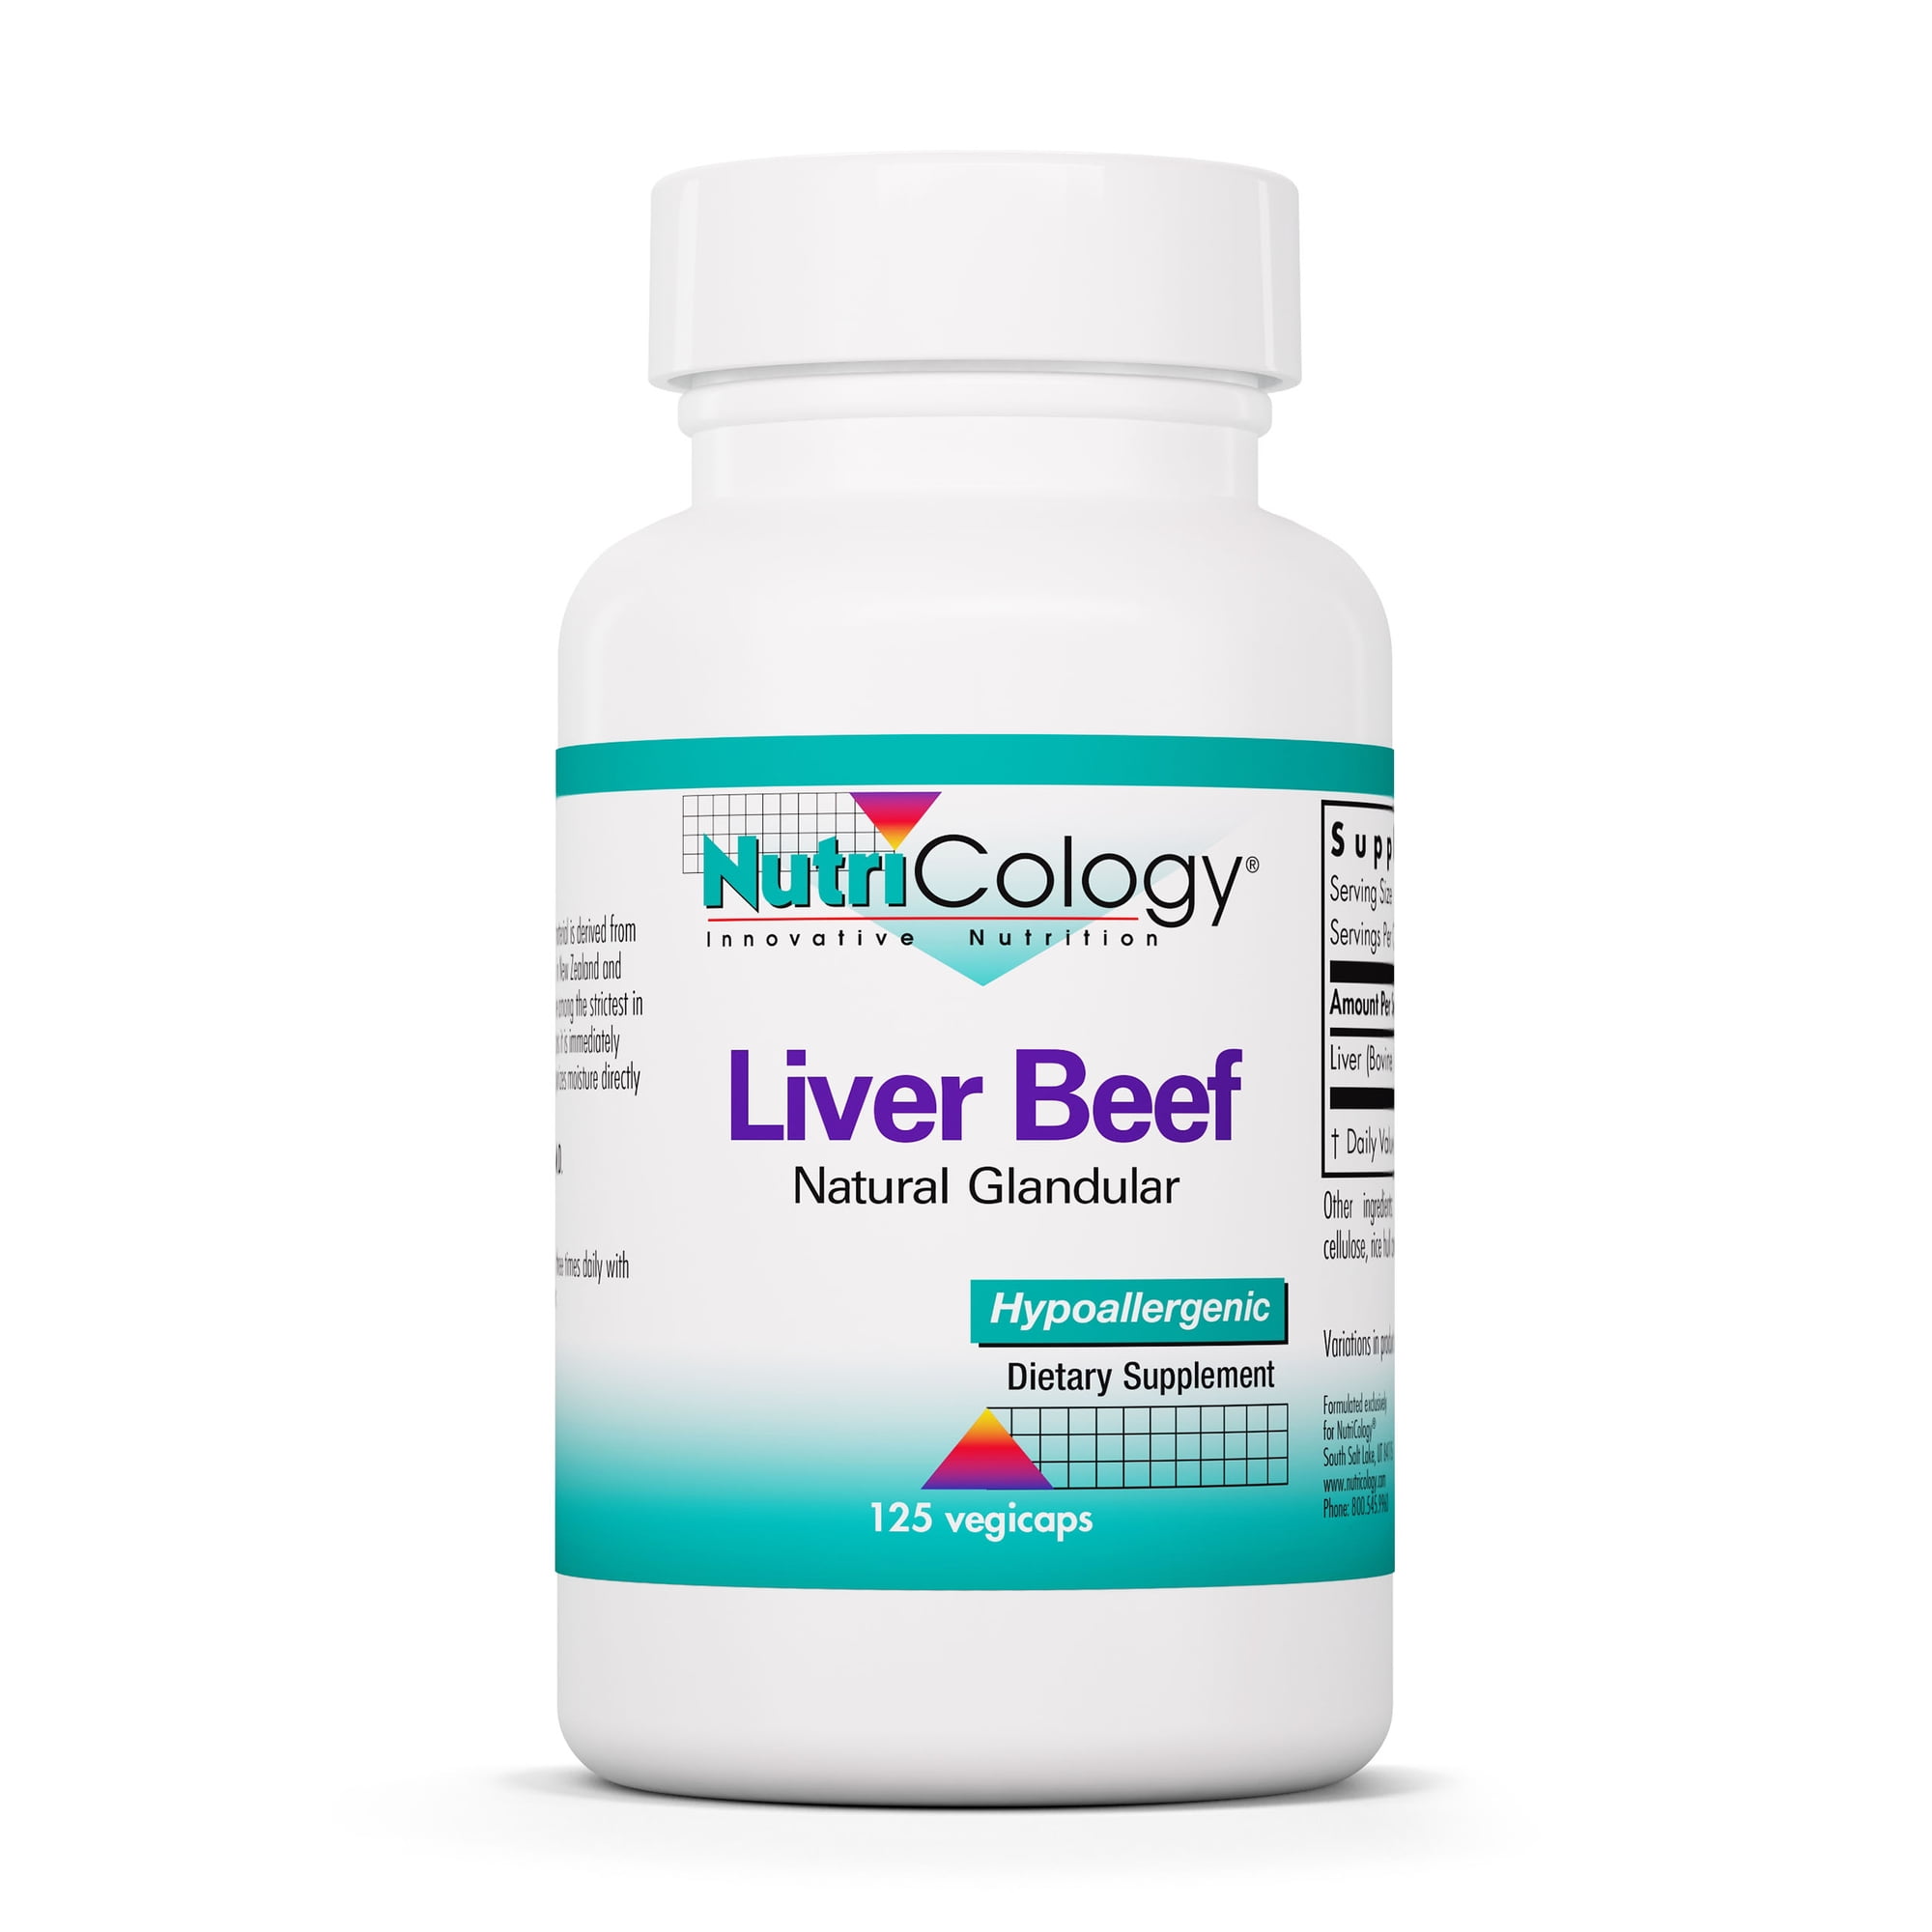 NutriCology Liver Beef - Natural Glandular, Liver and Nutrition Support ...